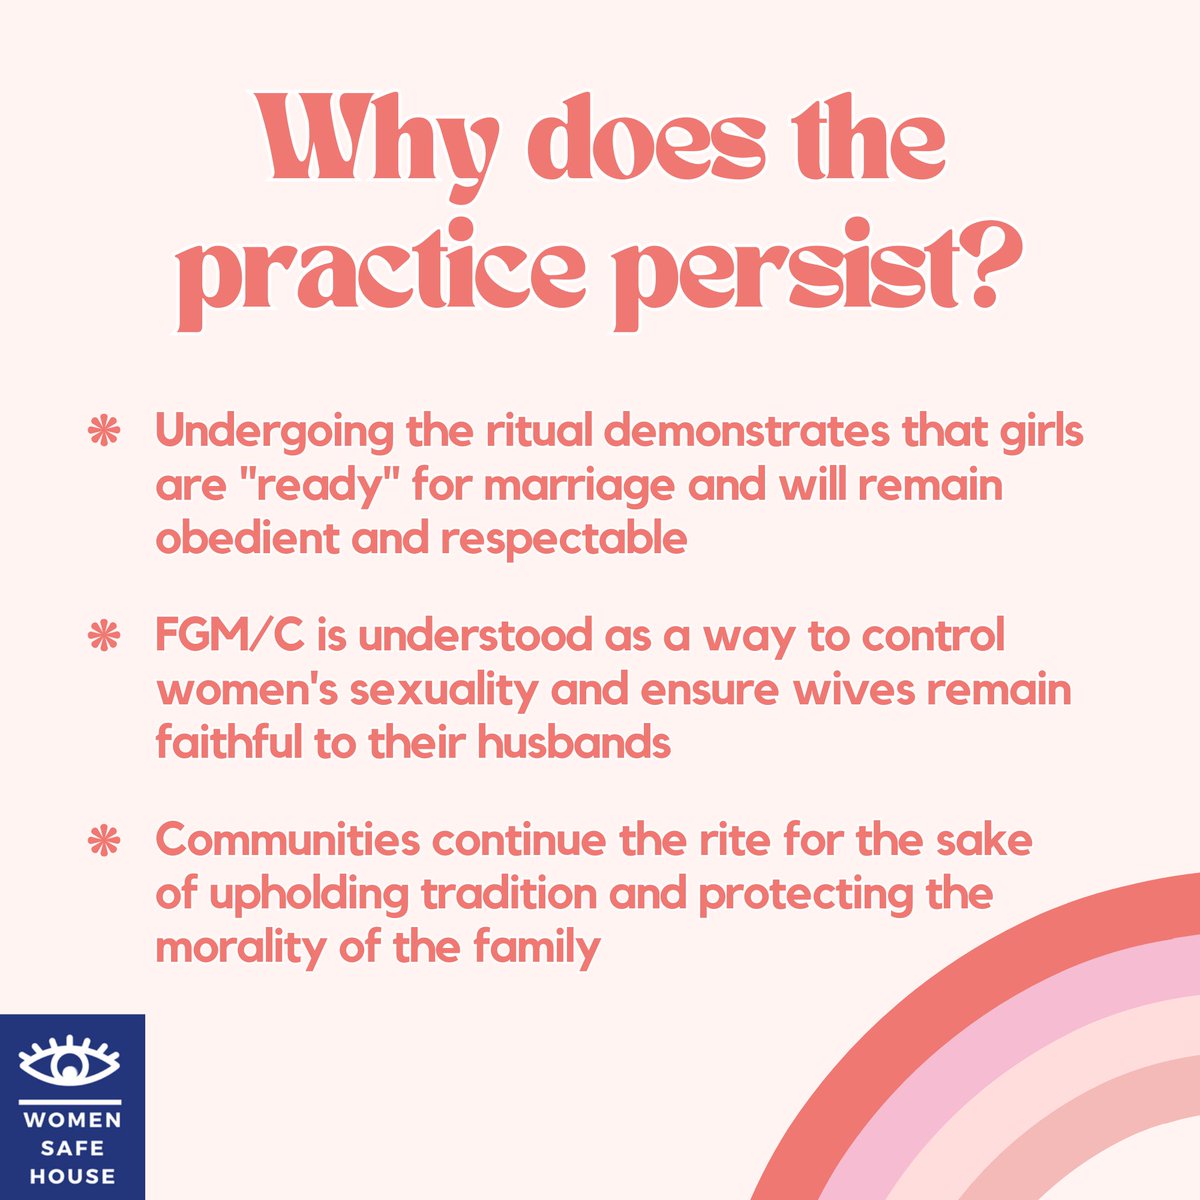 Despite its many health risks and human rights violations, female genital mutilation/cutting (FGM/C) continues to occur because it is a long-standing cultural norm in many communities.

#womensafehouse #women #fgmc #endfgmc #endgenderbasedviolence